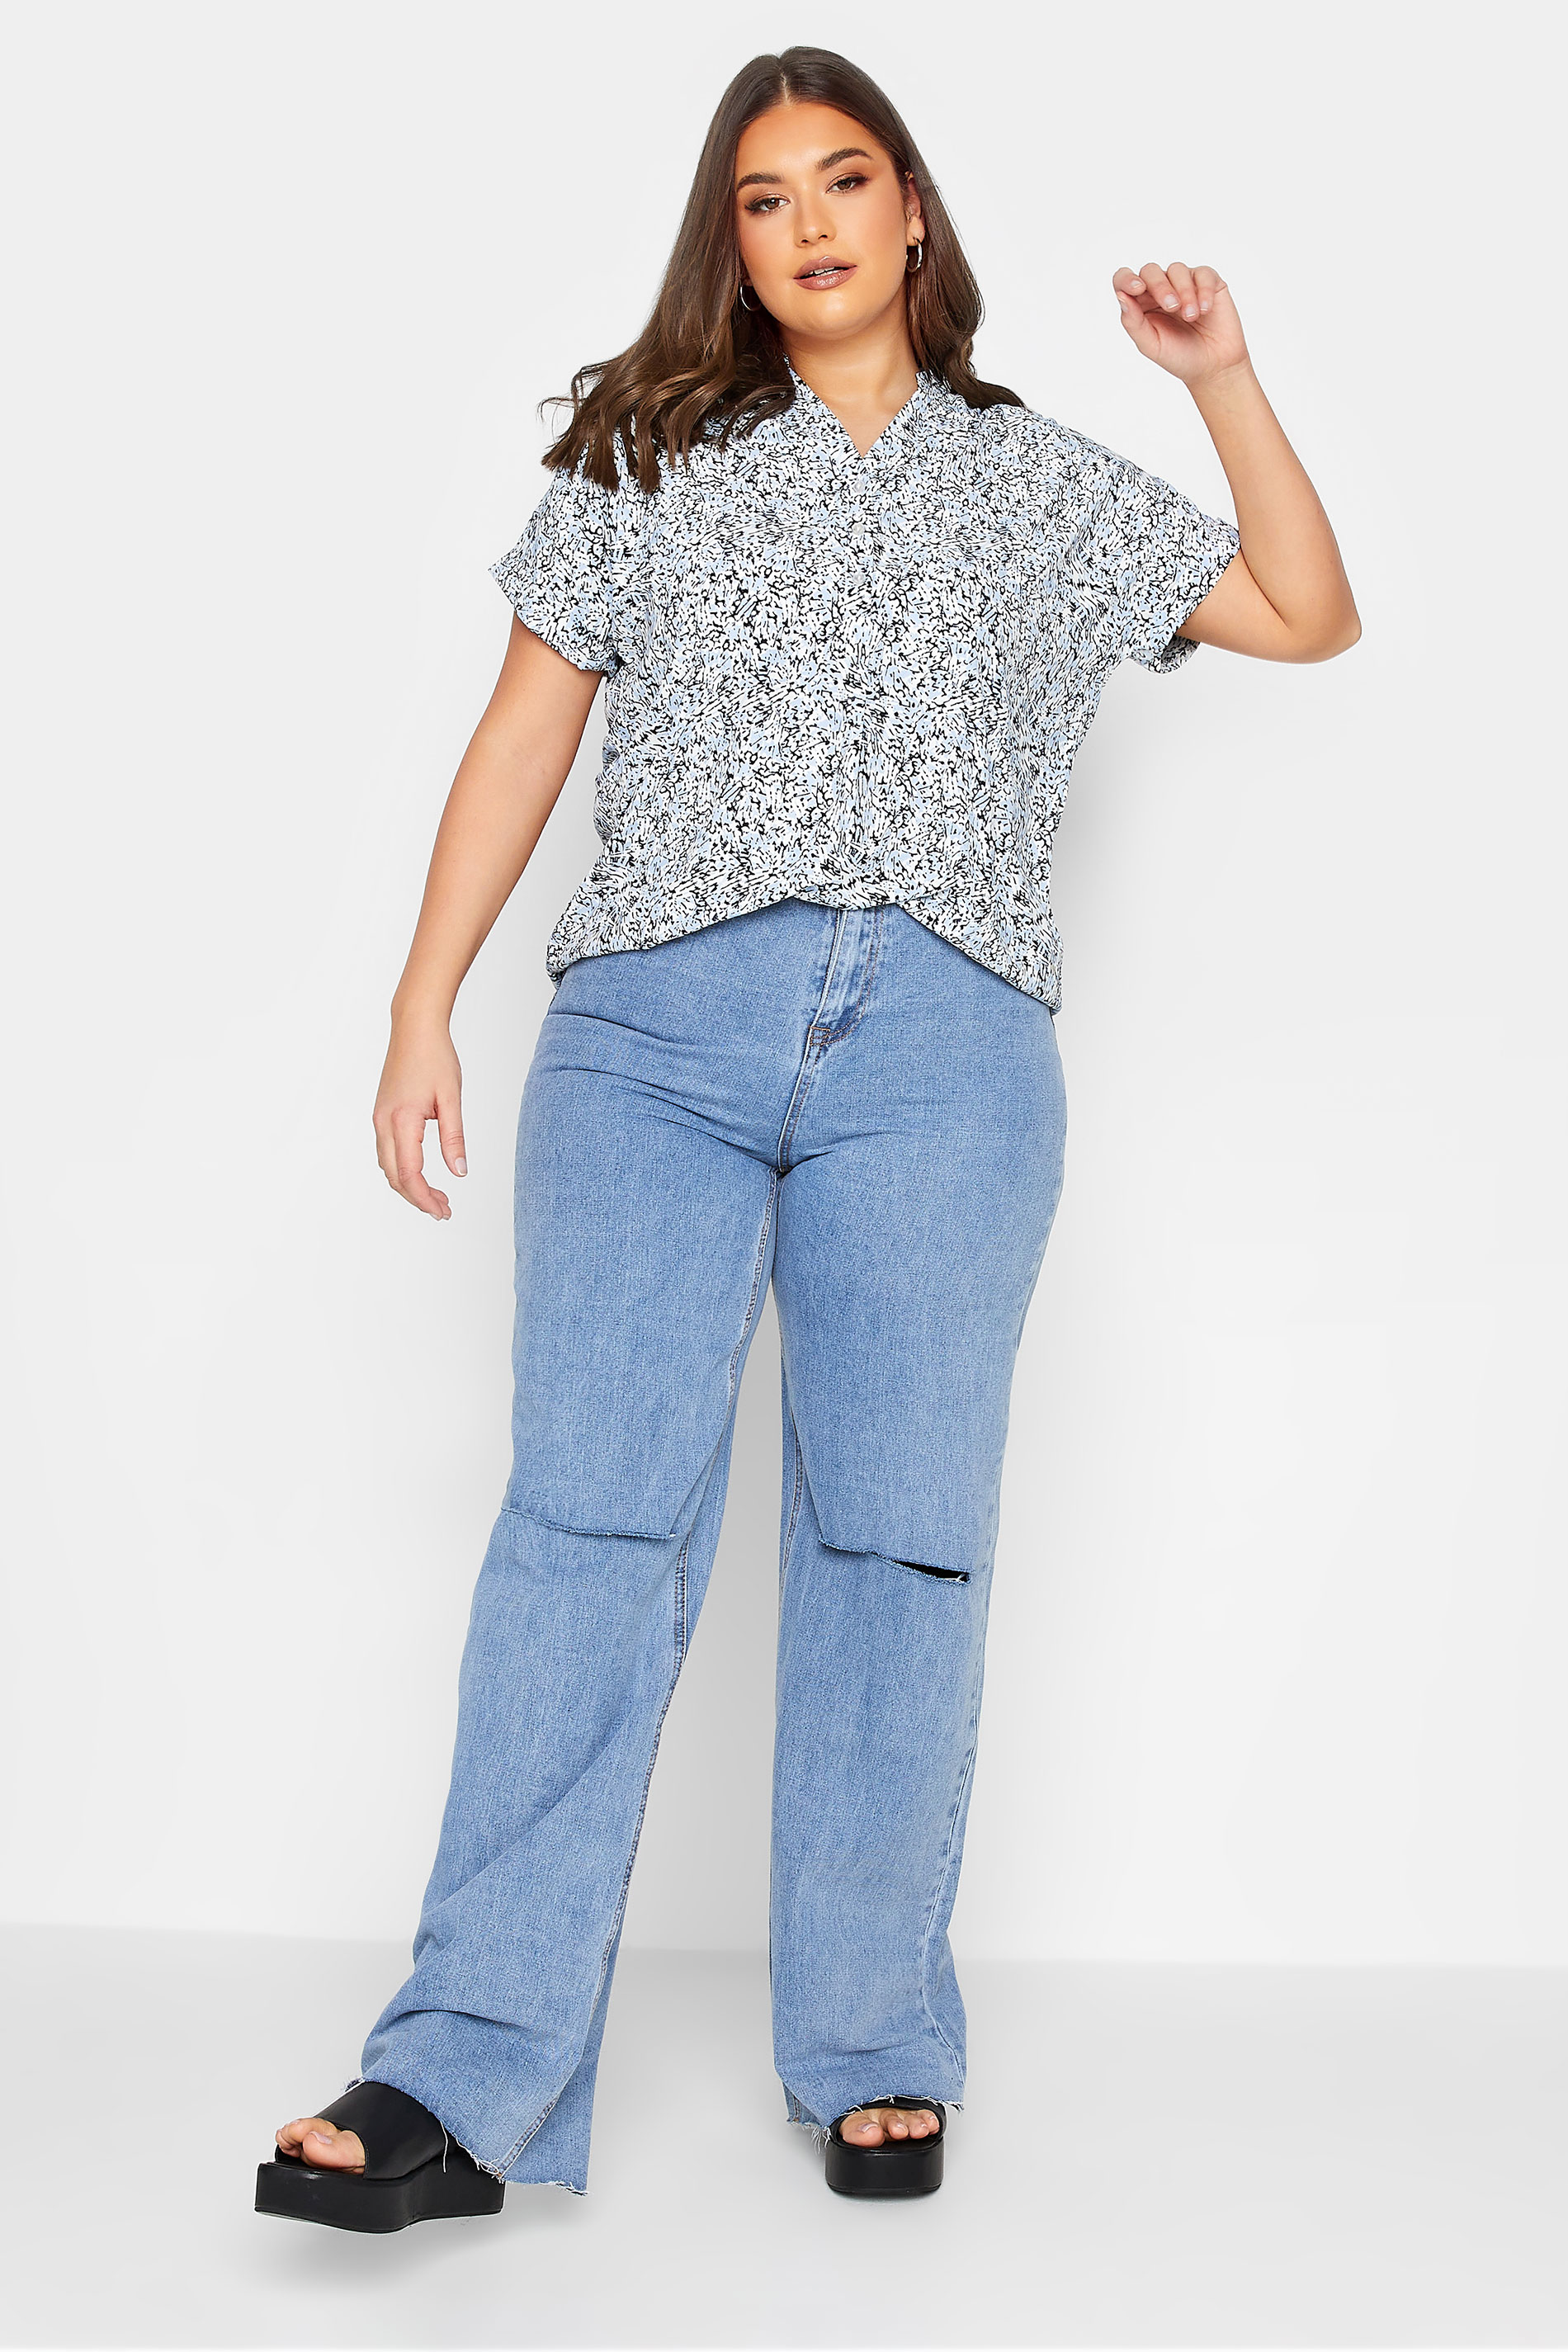 YOURS Plus Size Curve Light Blue Mixed Animal Print Half Placket Blouse | Yours Clothing  2